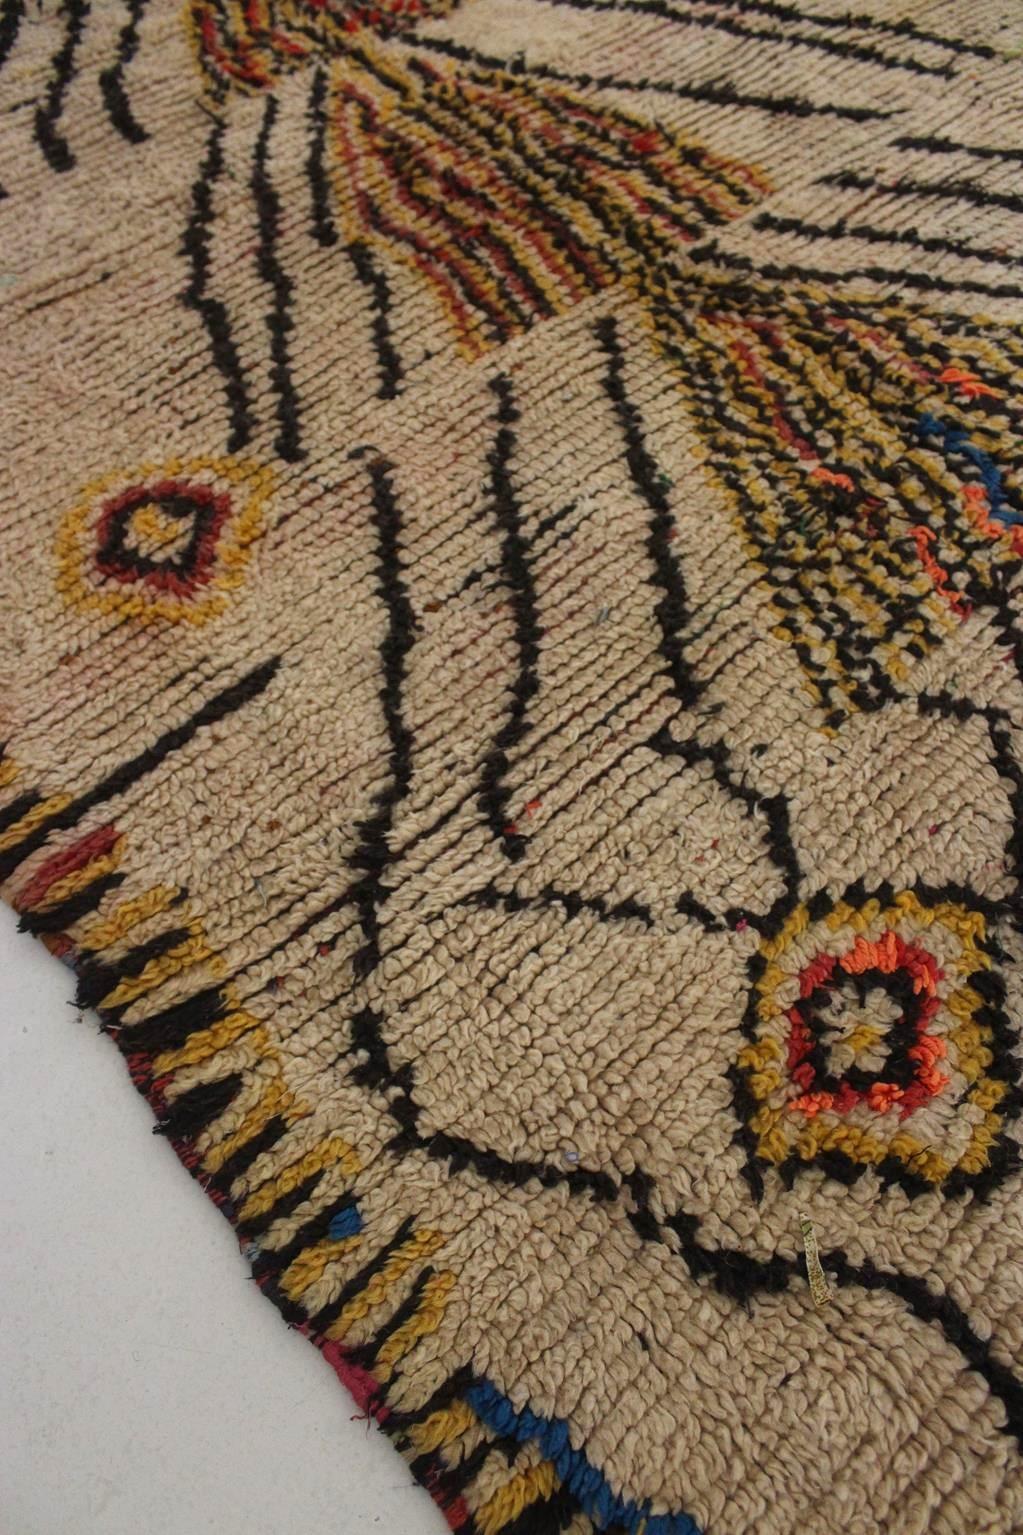 Vintage Moroccan Azilal rug - Beige/yellow - 3.9x6.7feet / 120x206cm For Sale 5